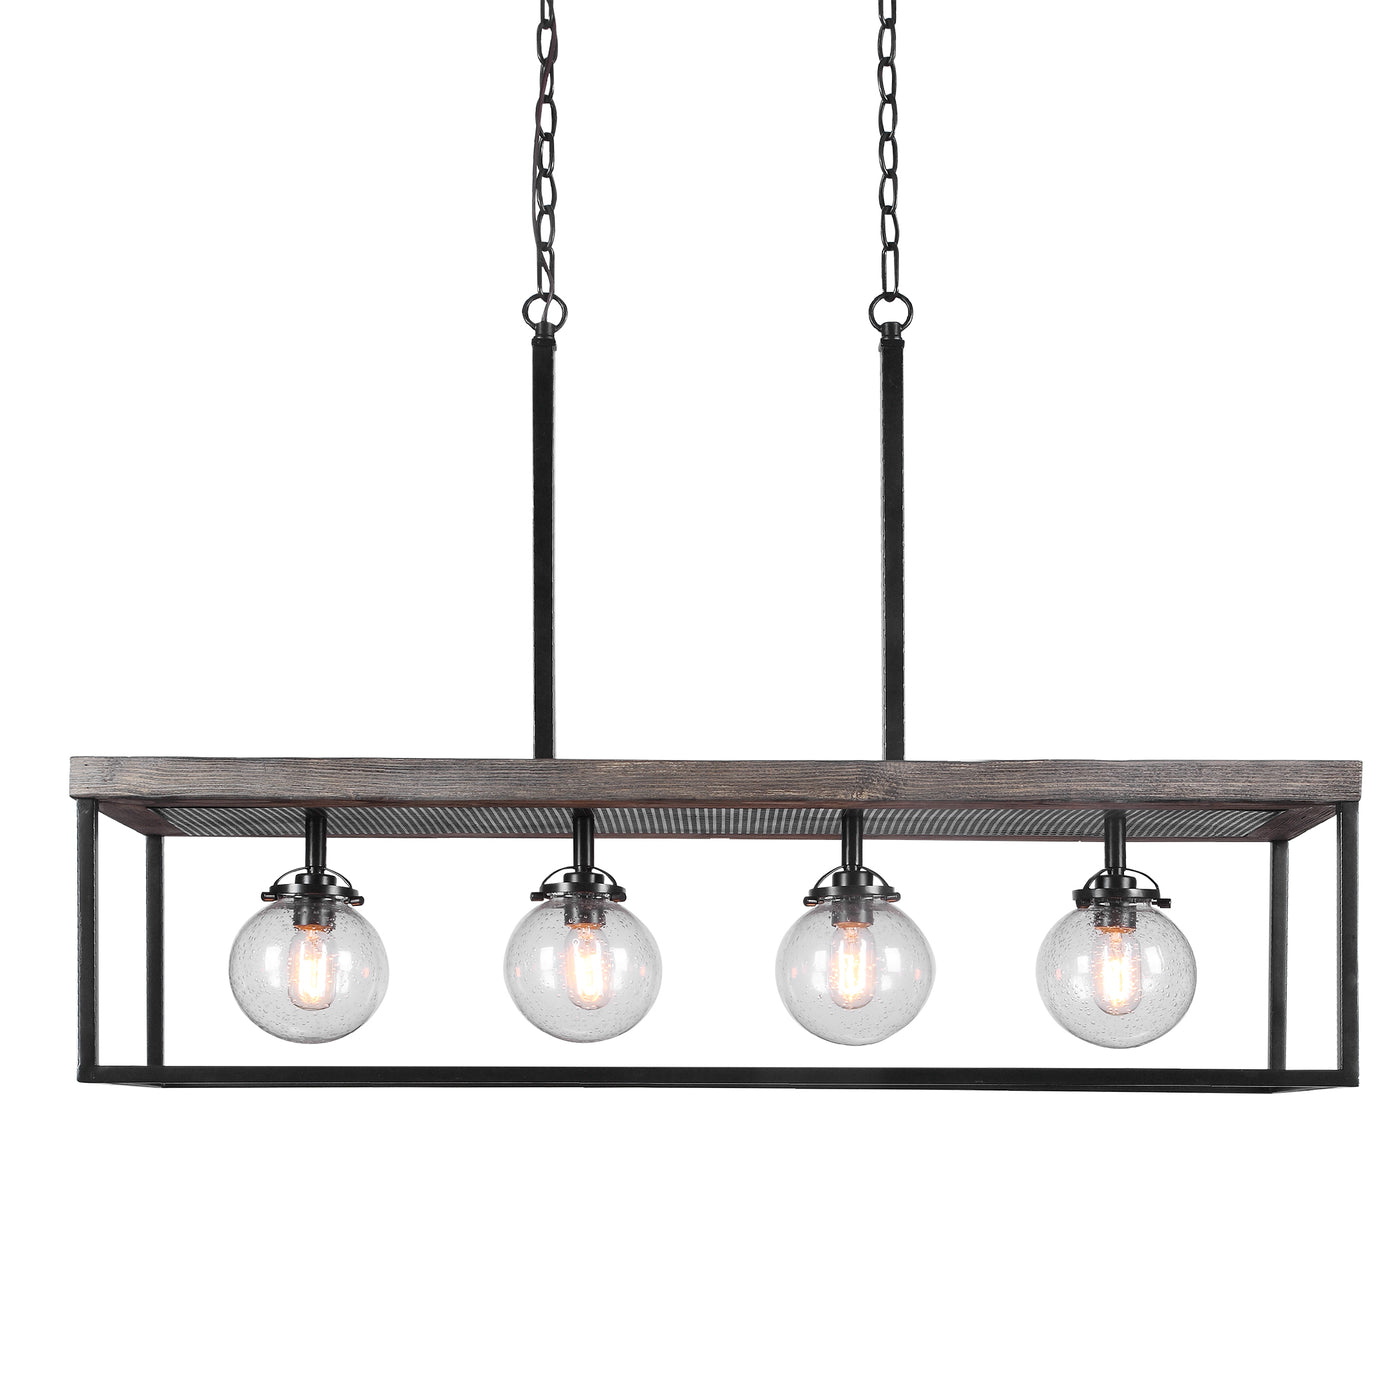 A Combination Of Both Refined Rustic And Industrial Elements Featuring A Textured Black Metal Finish With Distressed Wood ...